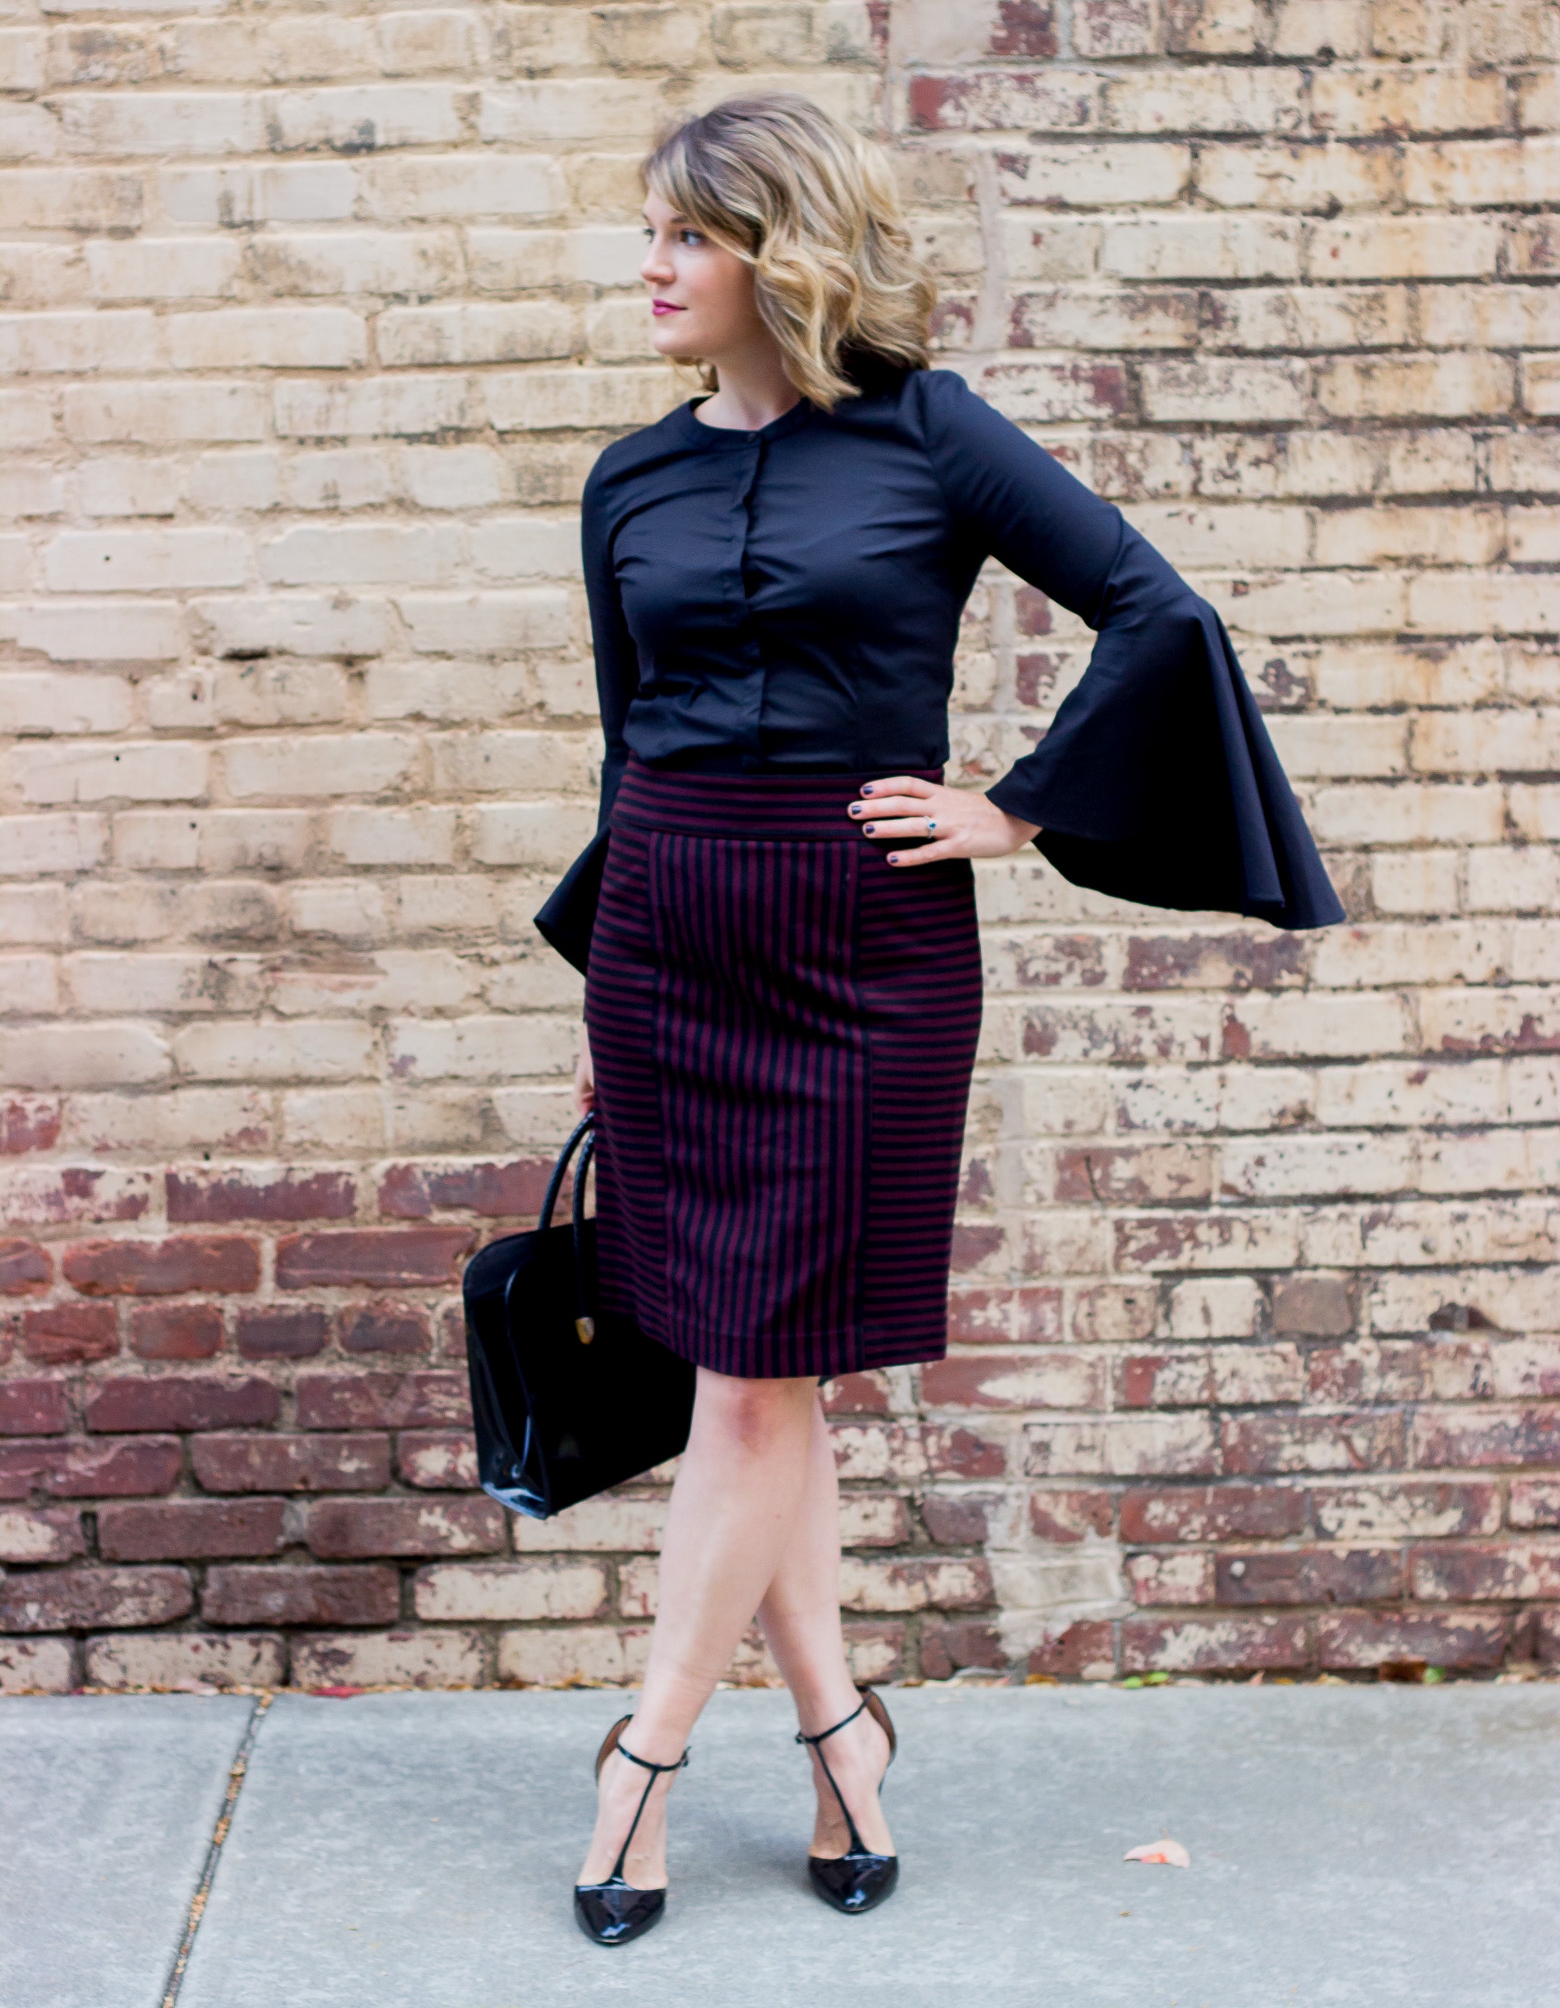 BELL SLEEVES AT WORK? YES, BUT…